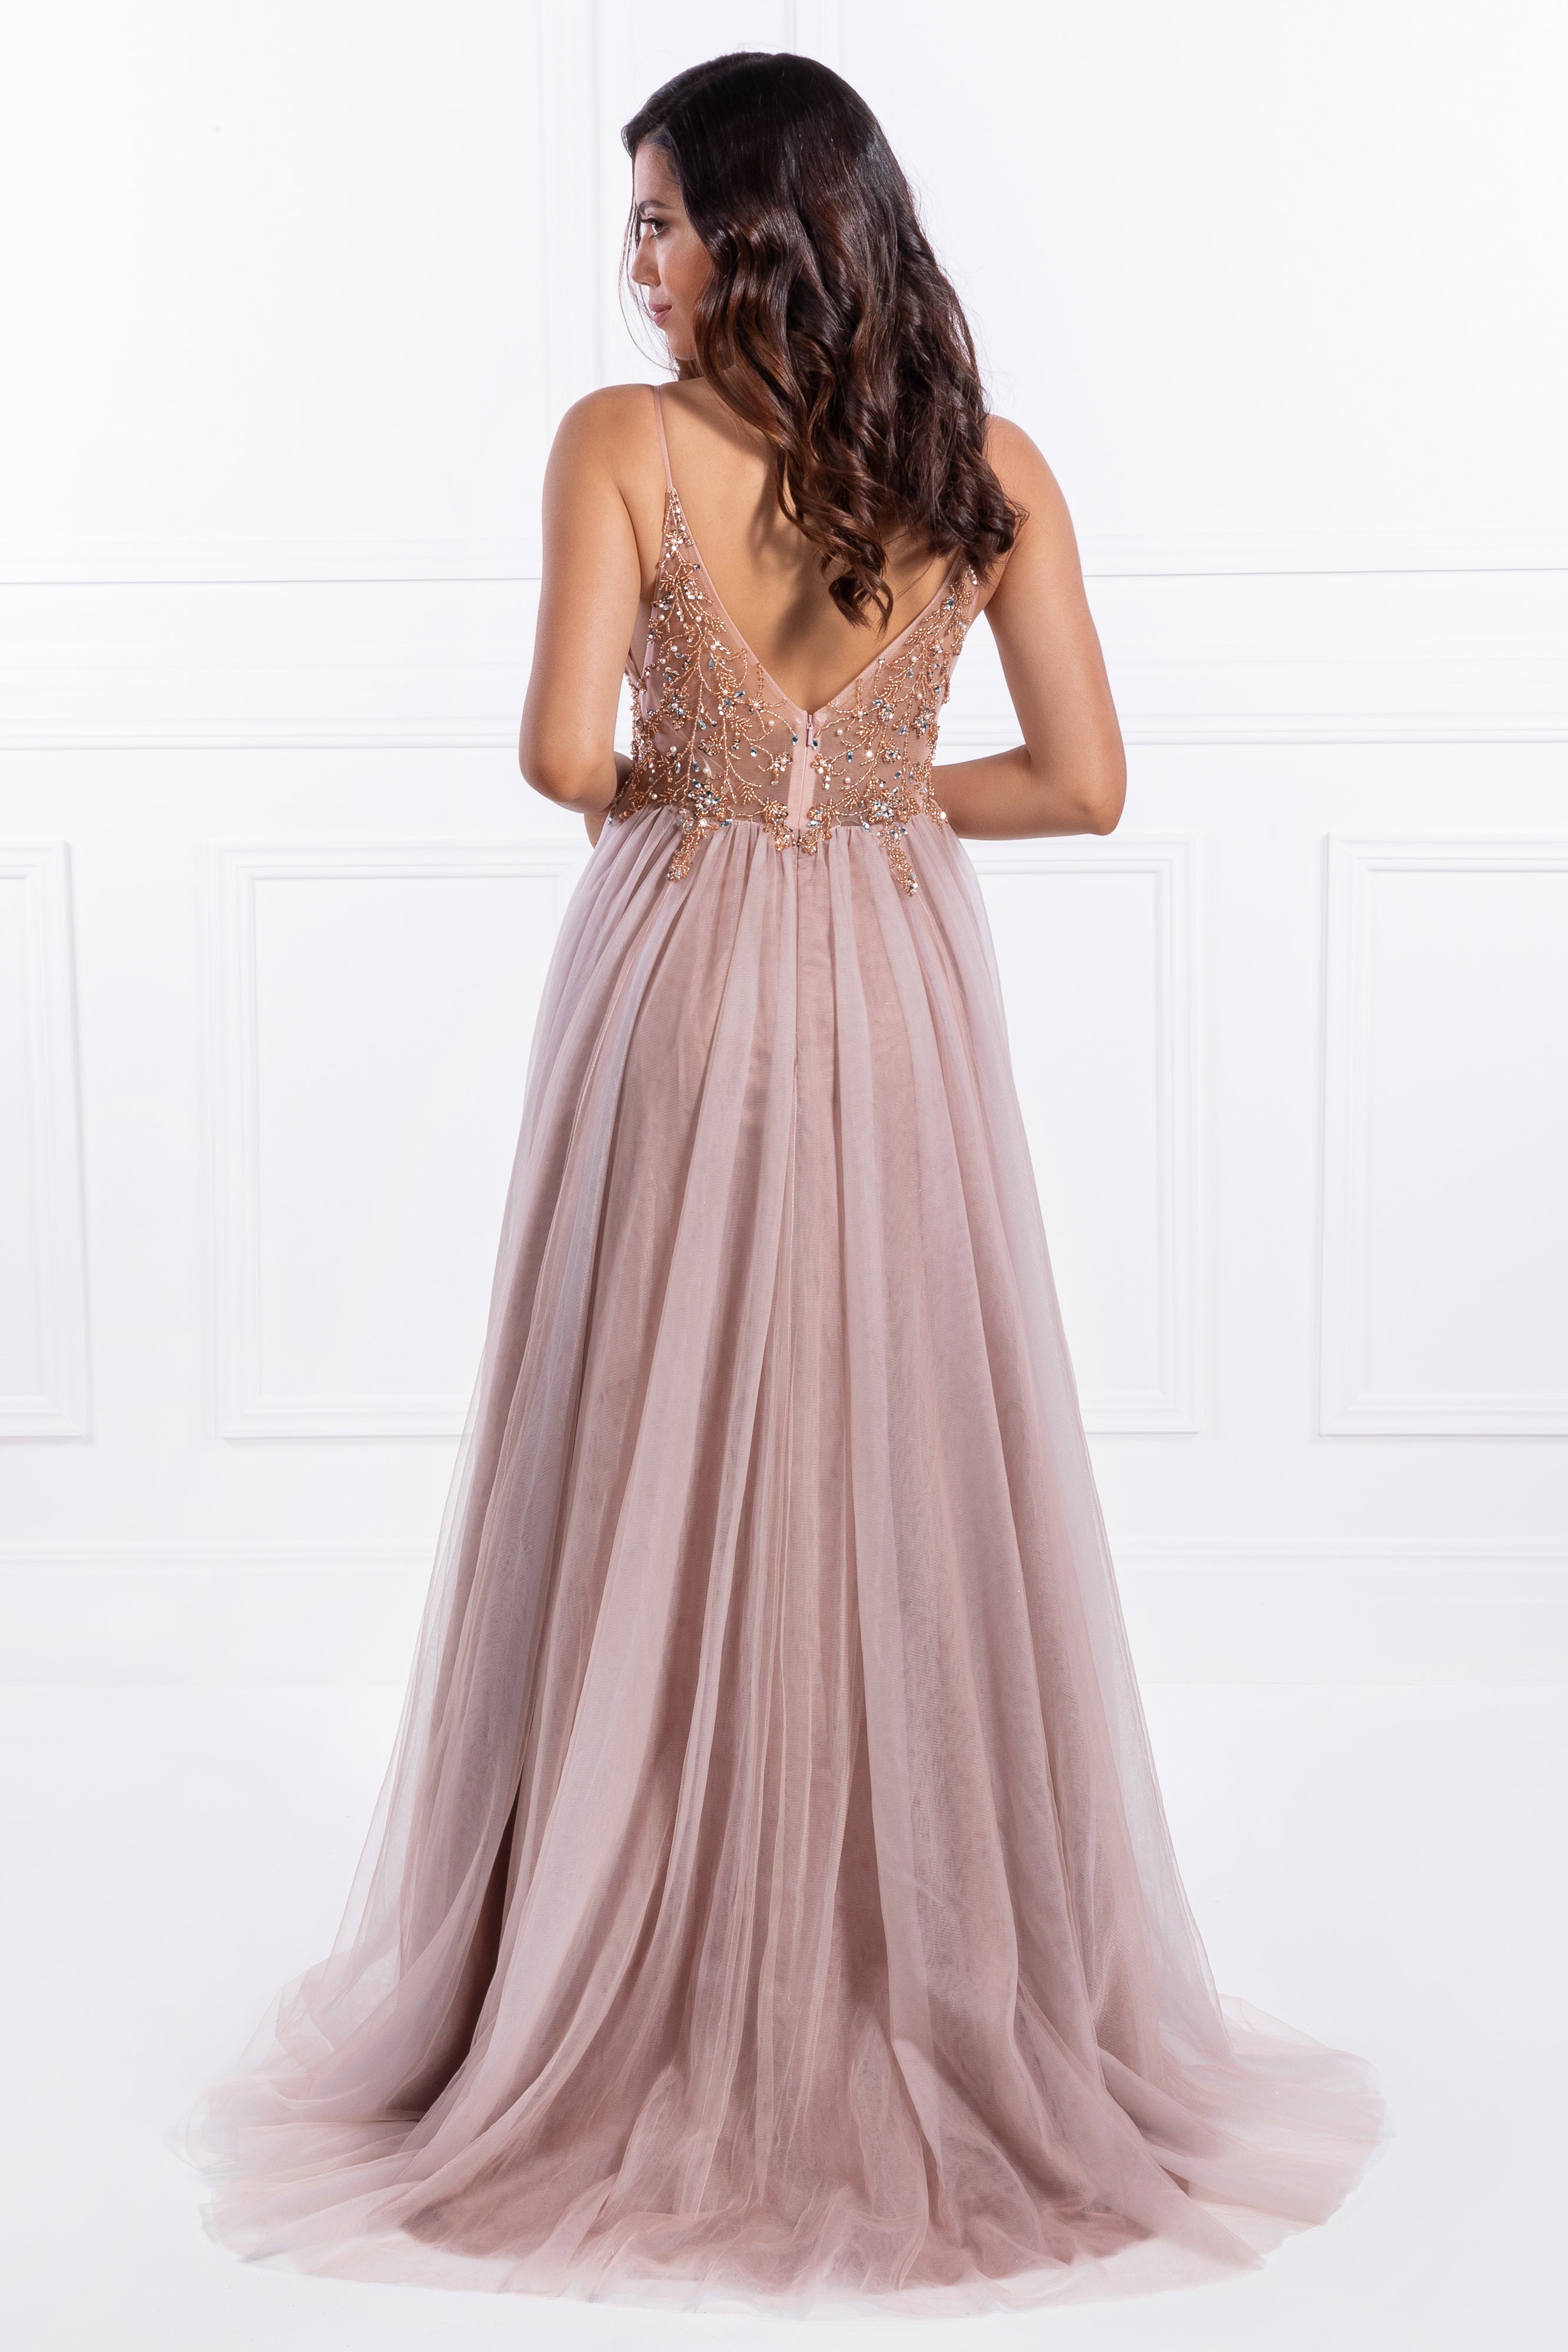 Honey Couture JANA Pink Crystal Beaded Tulle Formal Gown